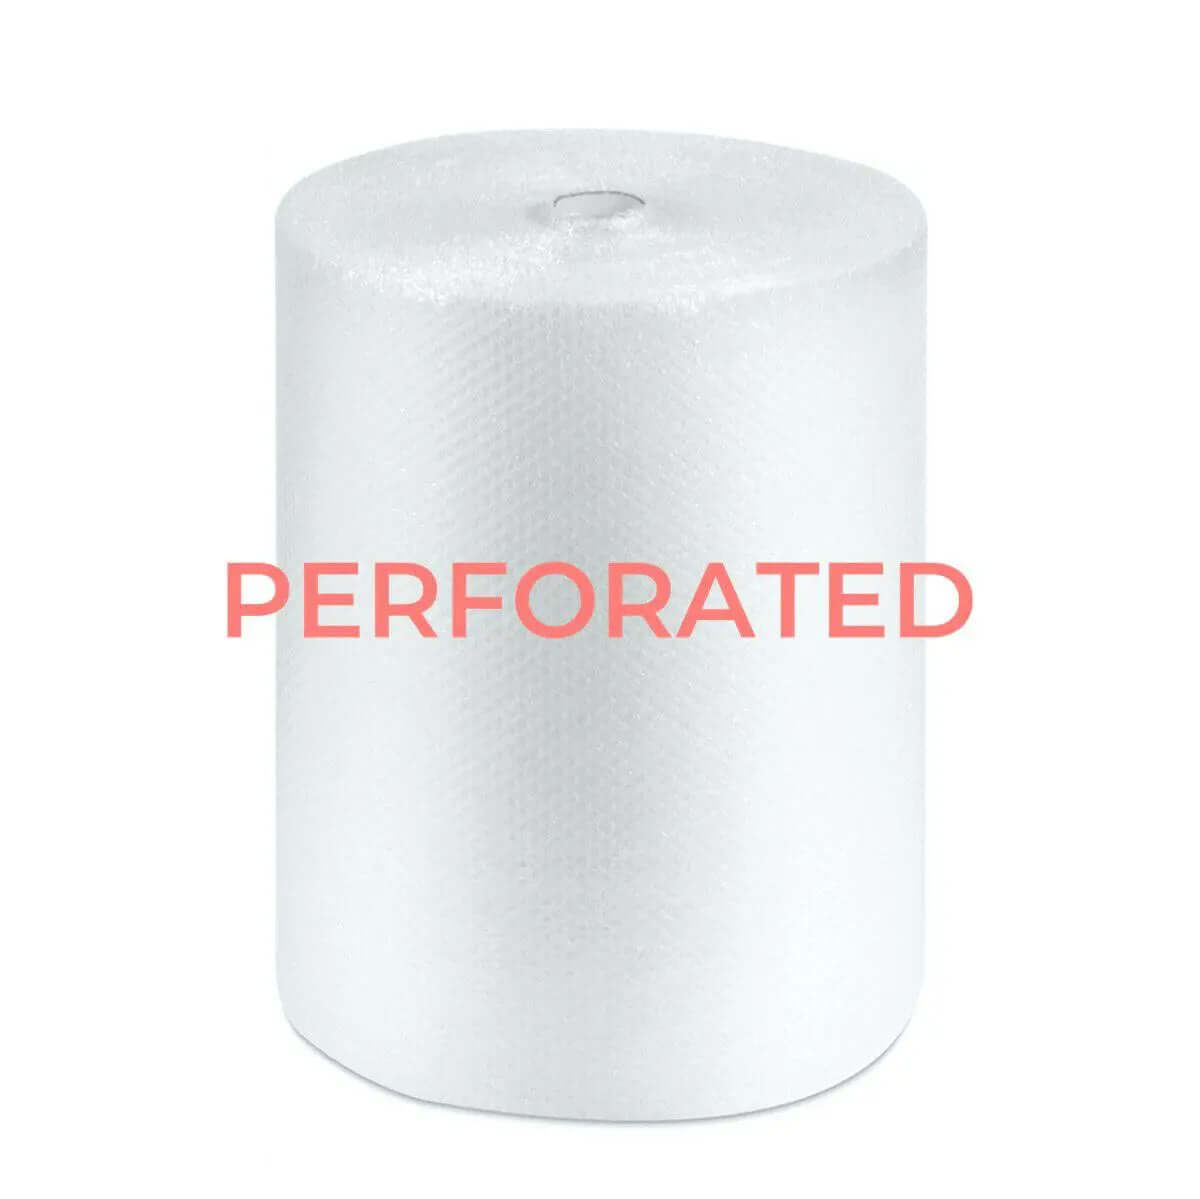 Perforated Bubble Wrap Roll - 750mm x 50m   Bubble Wrap Packstore Australia Packstore